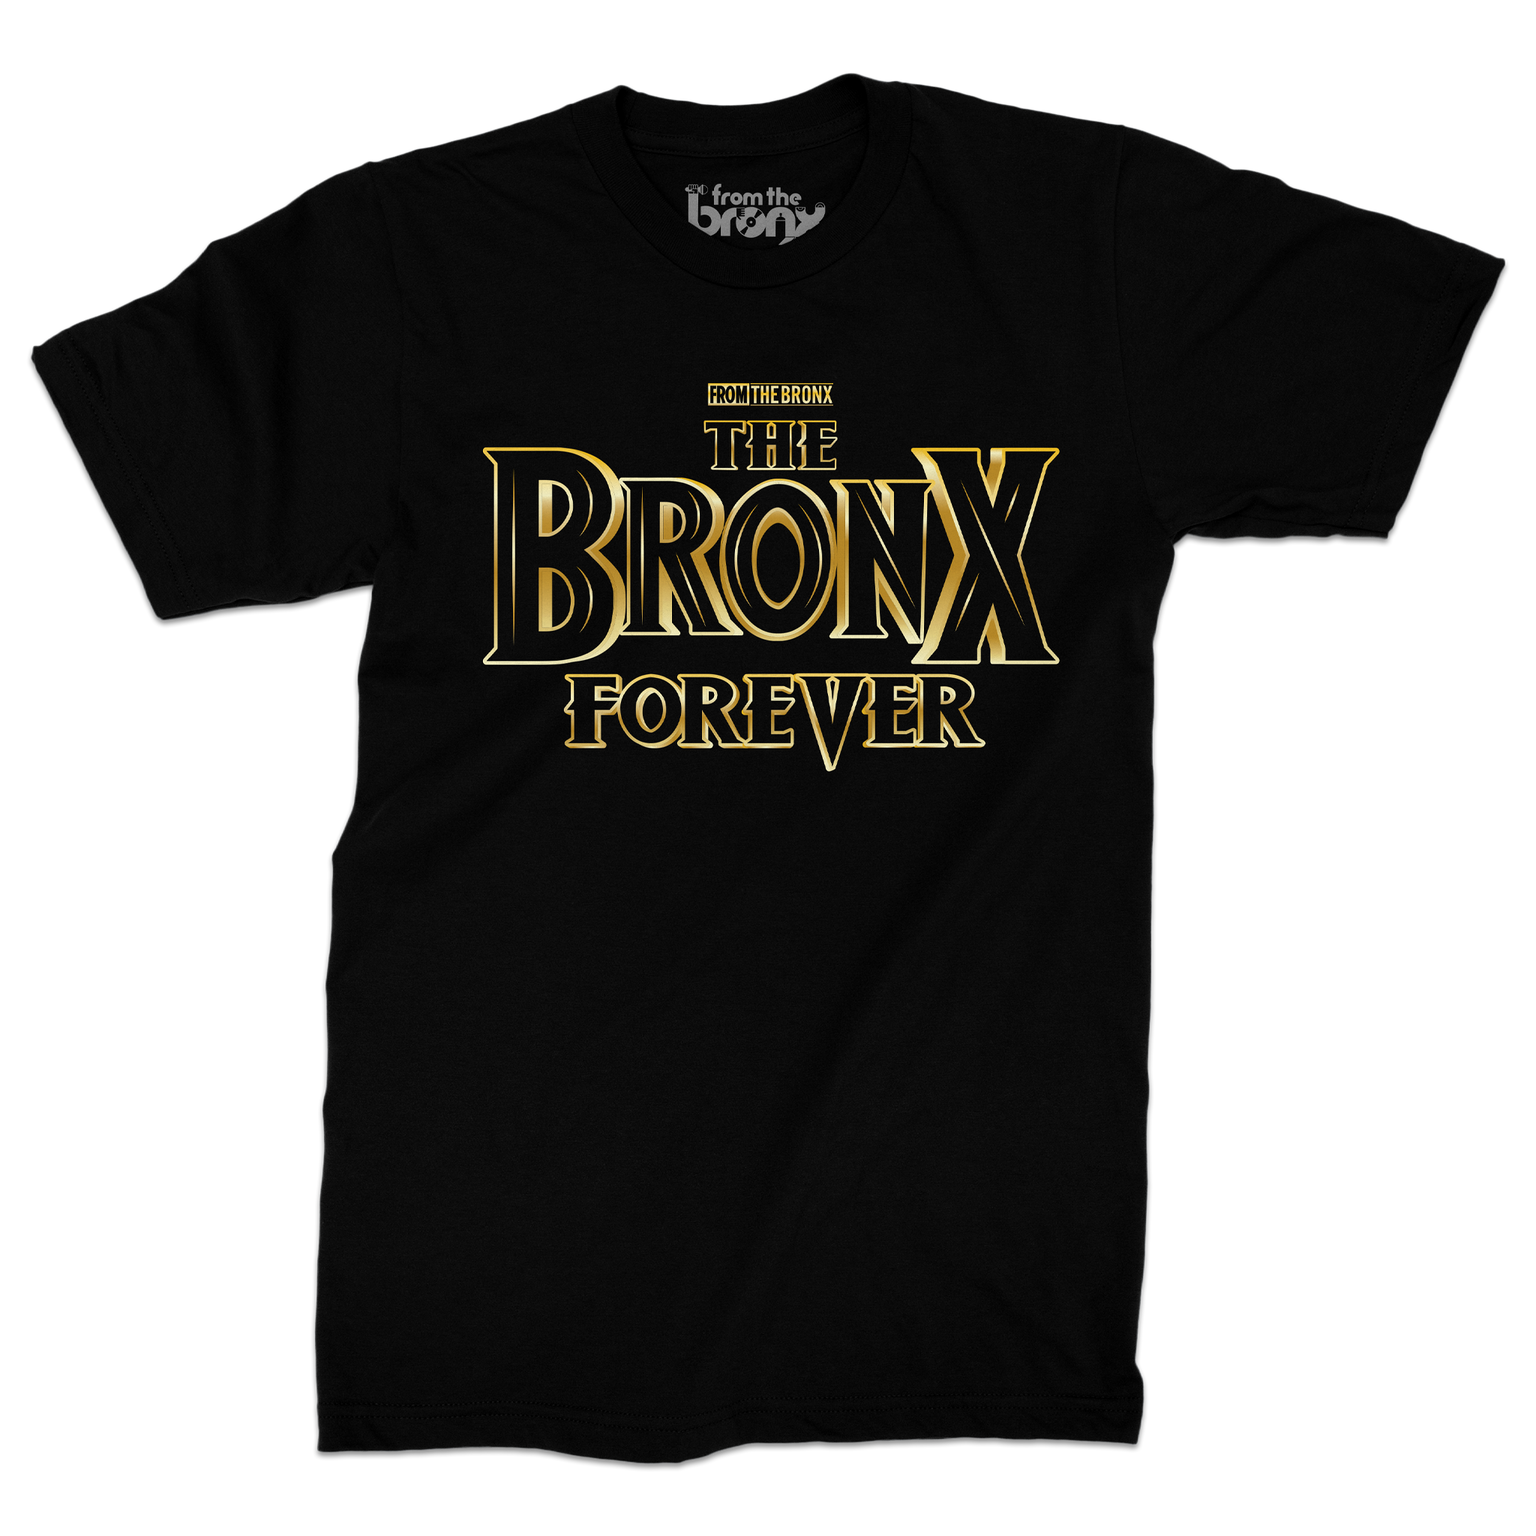 From The Bronx Apparel